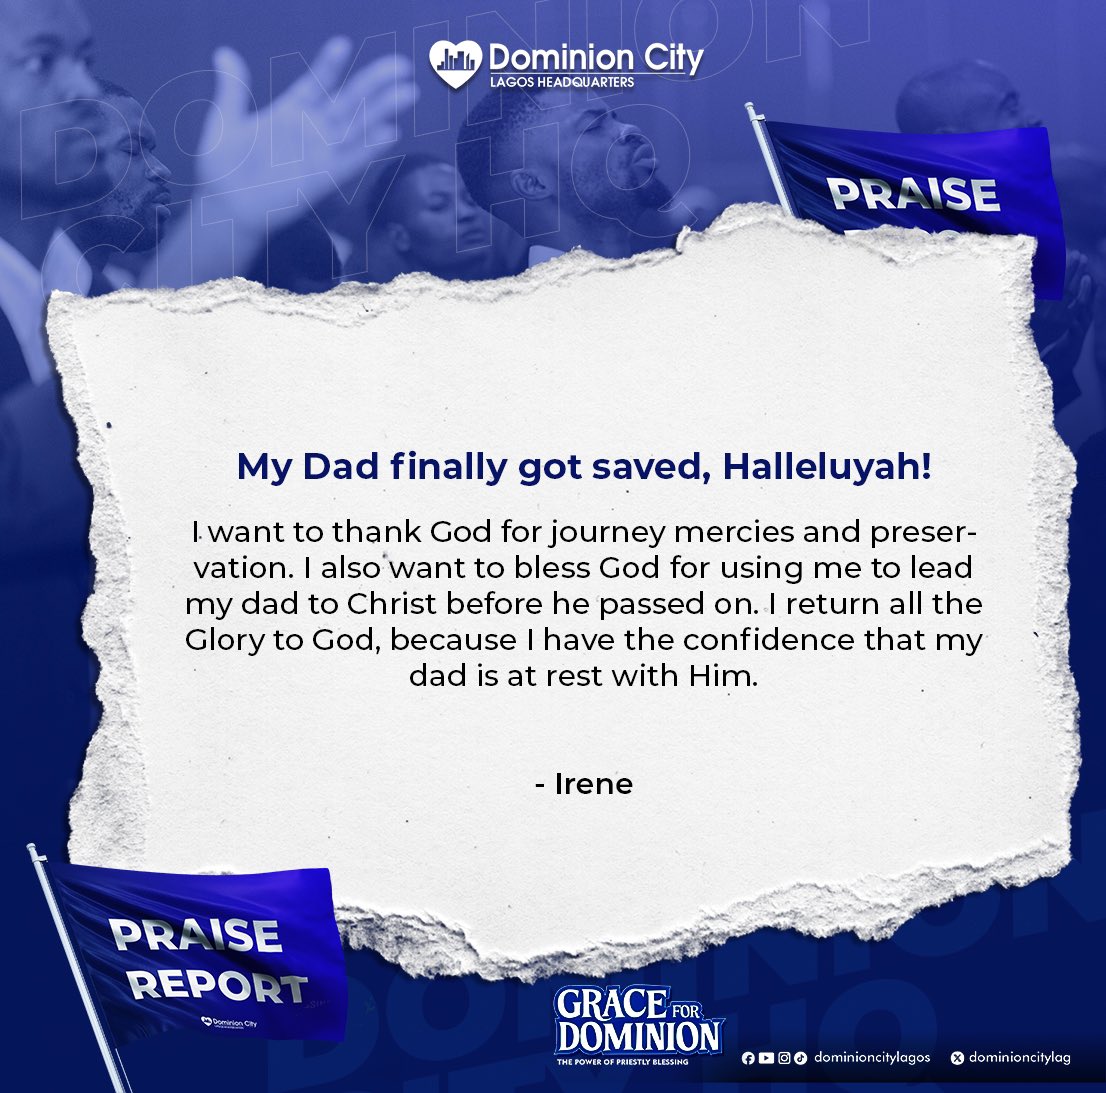 Praise report from today’s service. 

#DominionCity #DCLagosHQ #GraceForDominion #PriestlyBlessing